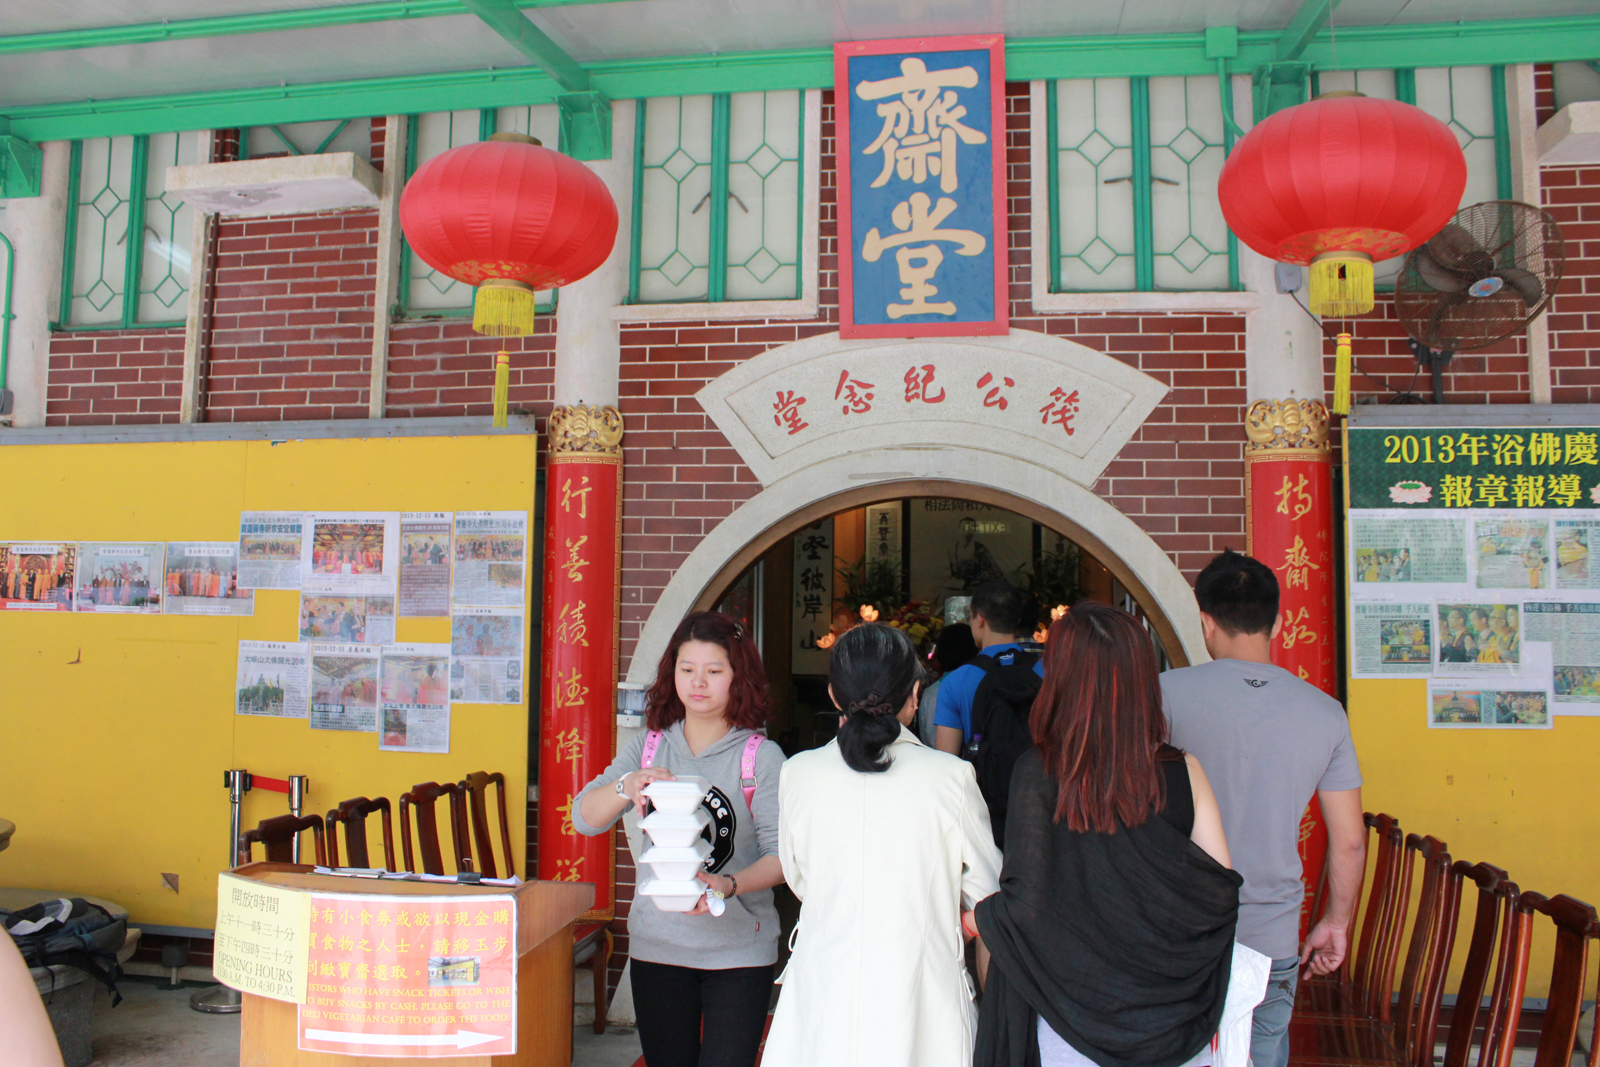 Here's the entrance into the temple's restaurant.